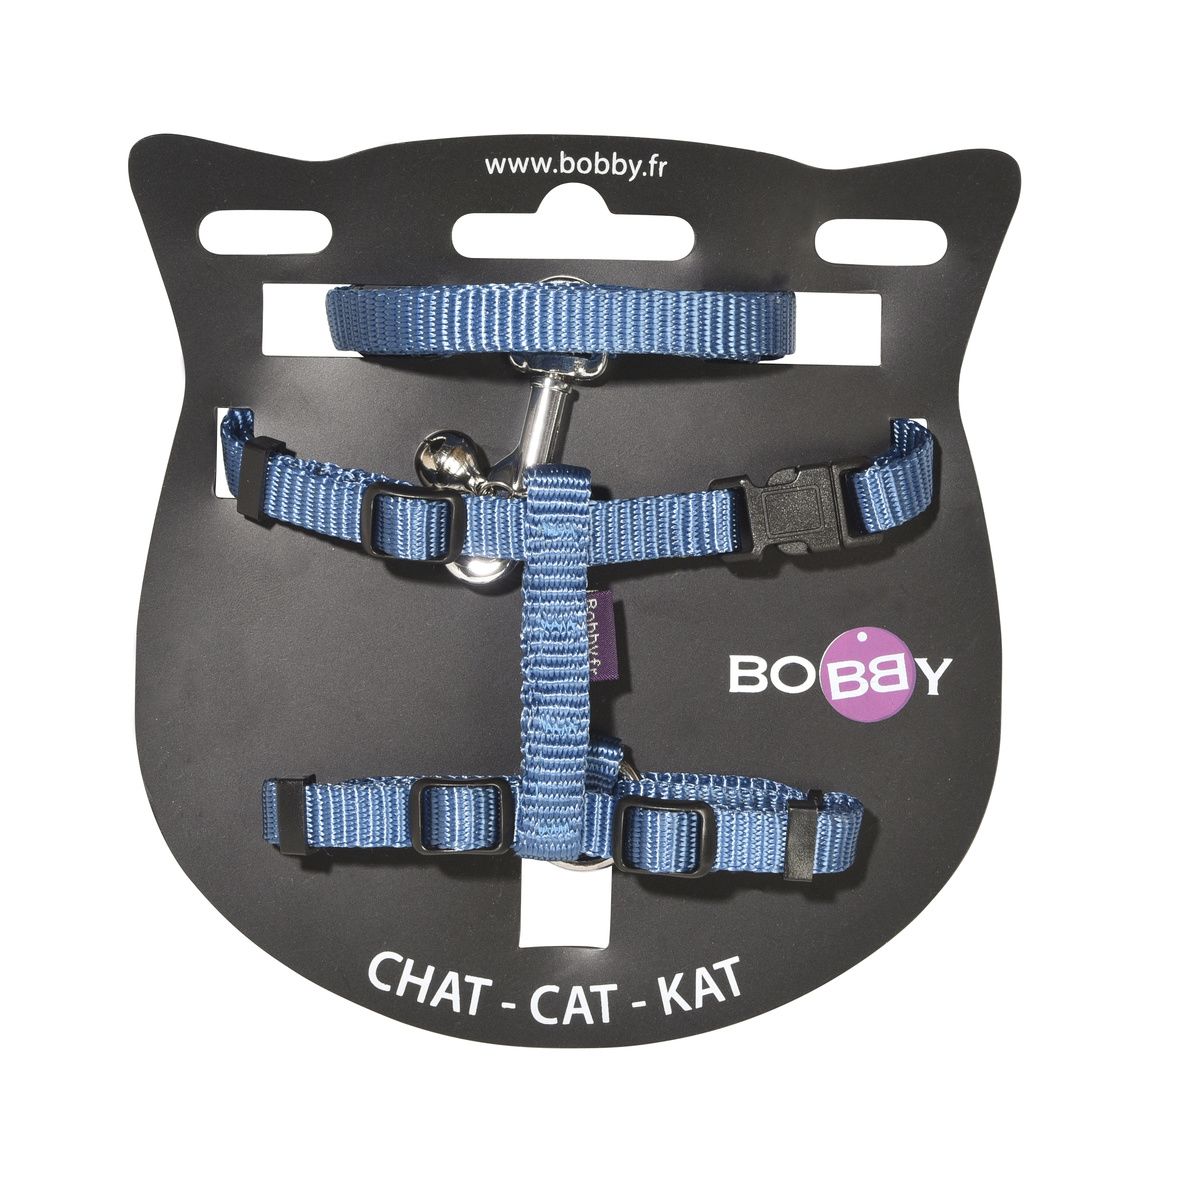 Harnais Laisse Chat Access Nylon Bobby Accessories For Dogs And Cats Collars Coats Jumpers